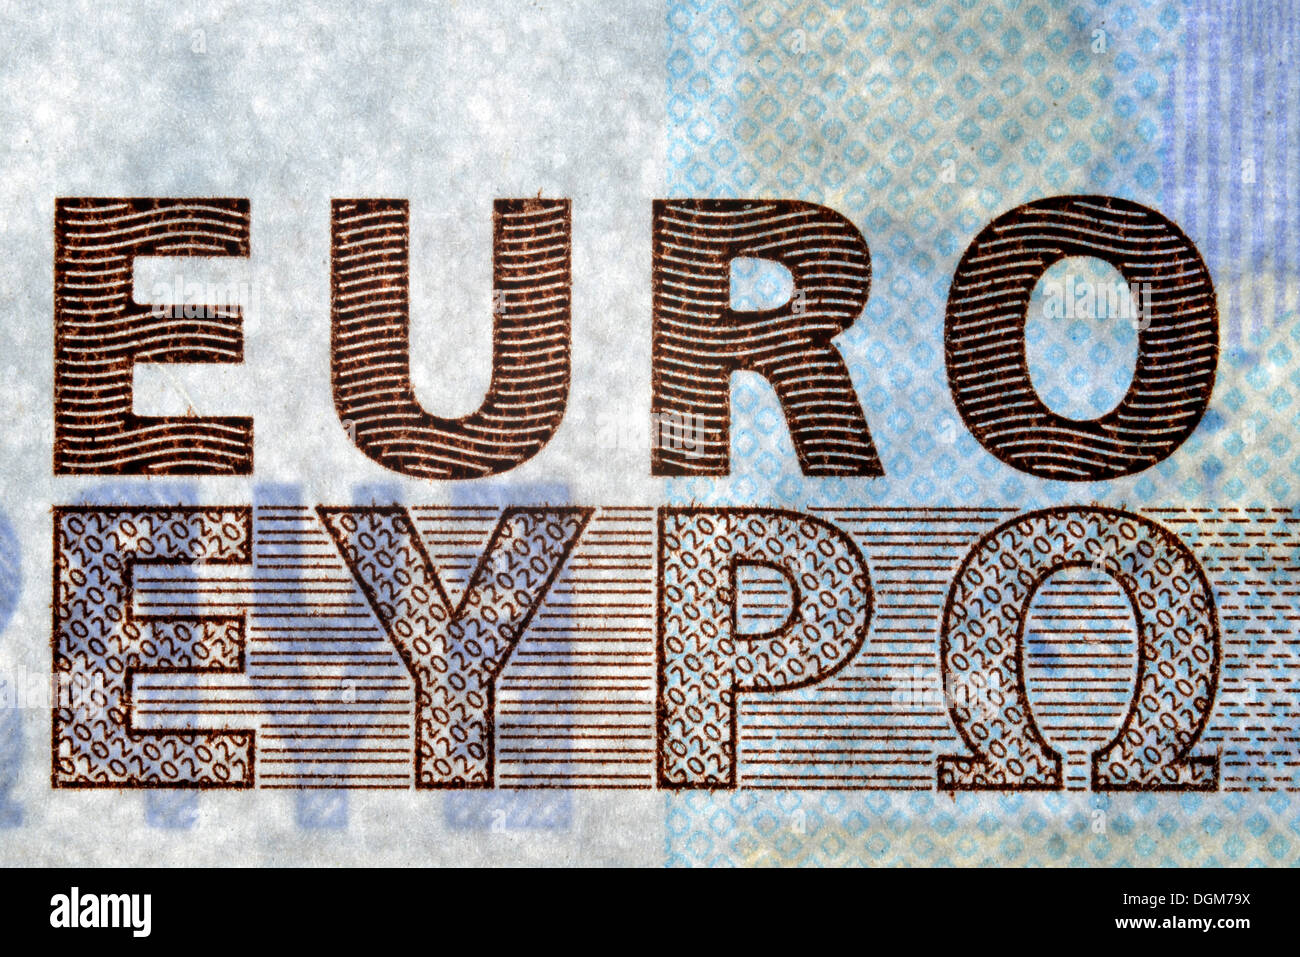 Security features of banknotes, 20 euro bill, raised print, value numbers in window, lettering EURO Stock Photo